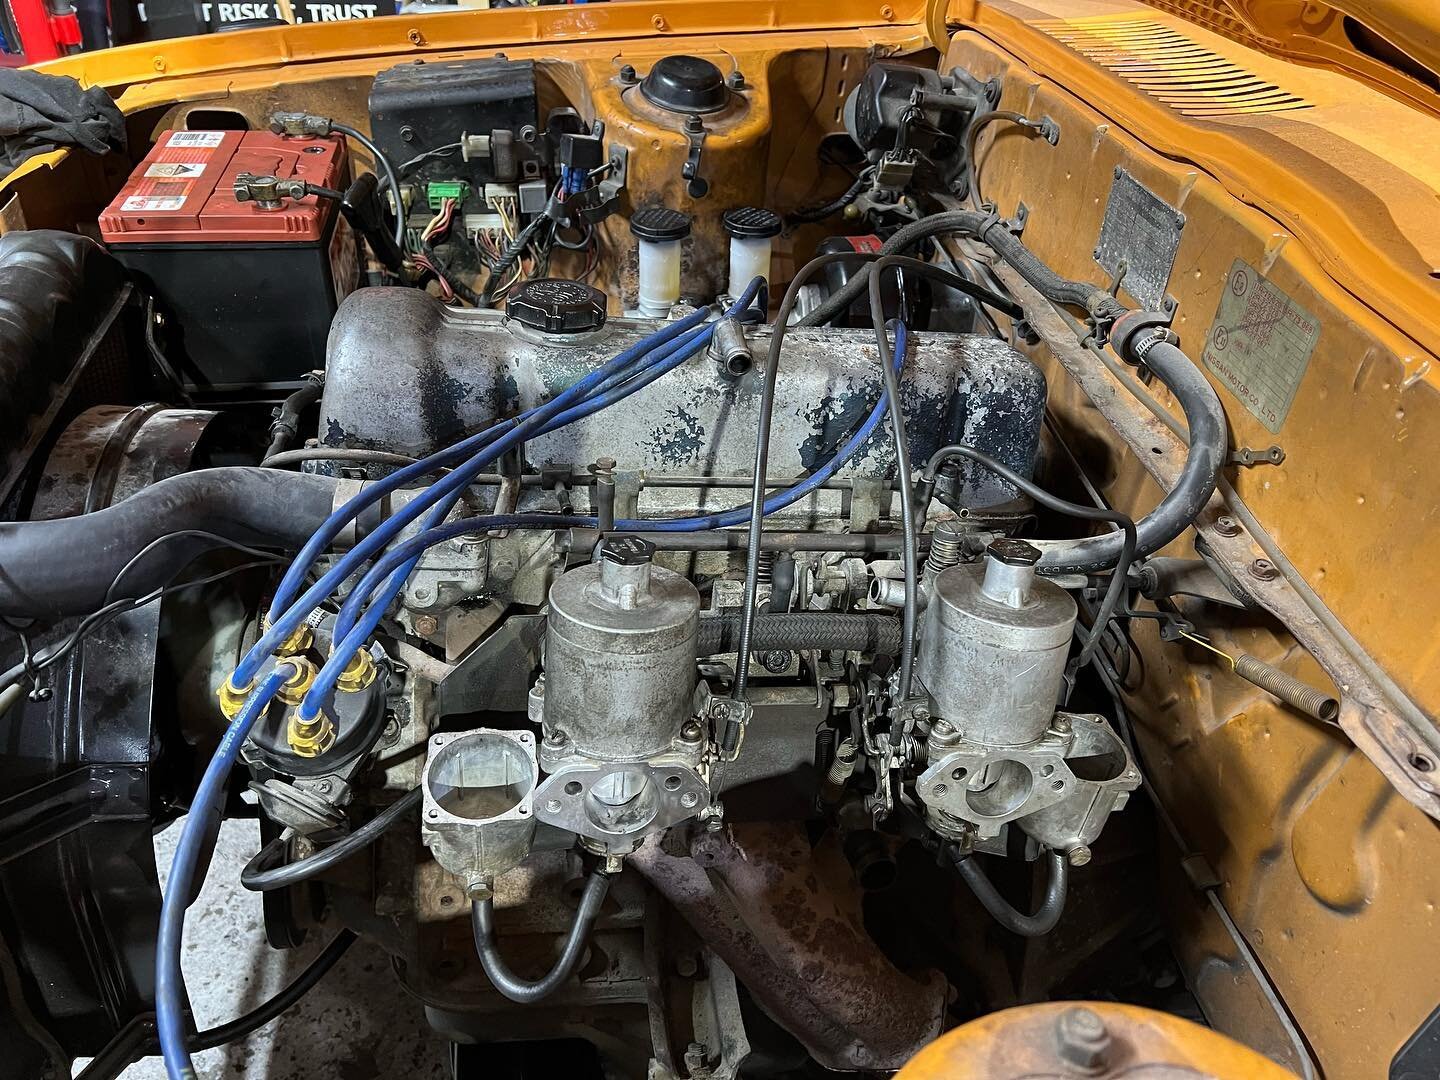 Finally getting around to rebuilding these #sucarbs on the #180bsss #datsun full clean in and out, new floats, needle valves, hoses and pump. #vintagecars #darylsmotors #service #restoration &amp; #repair #referafriend